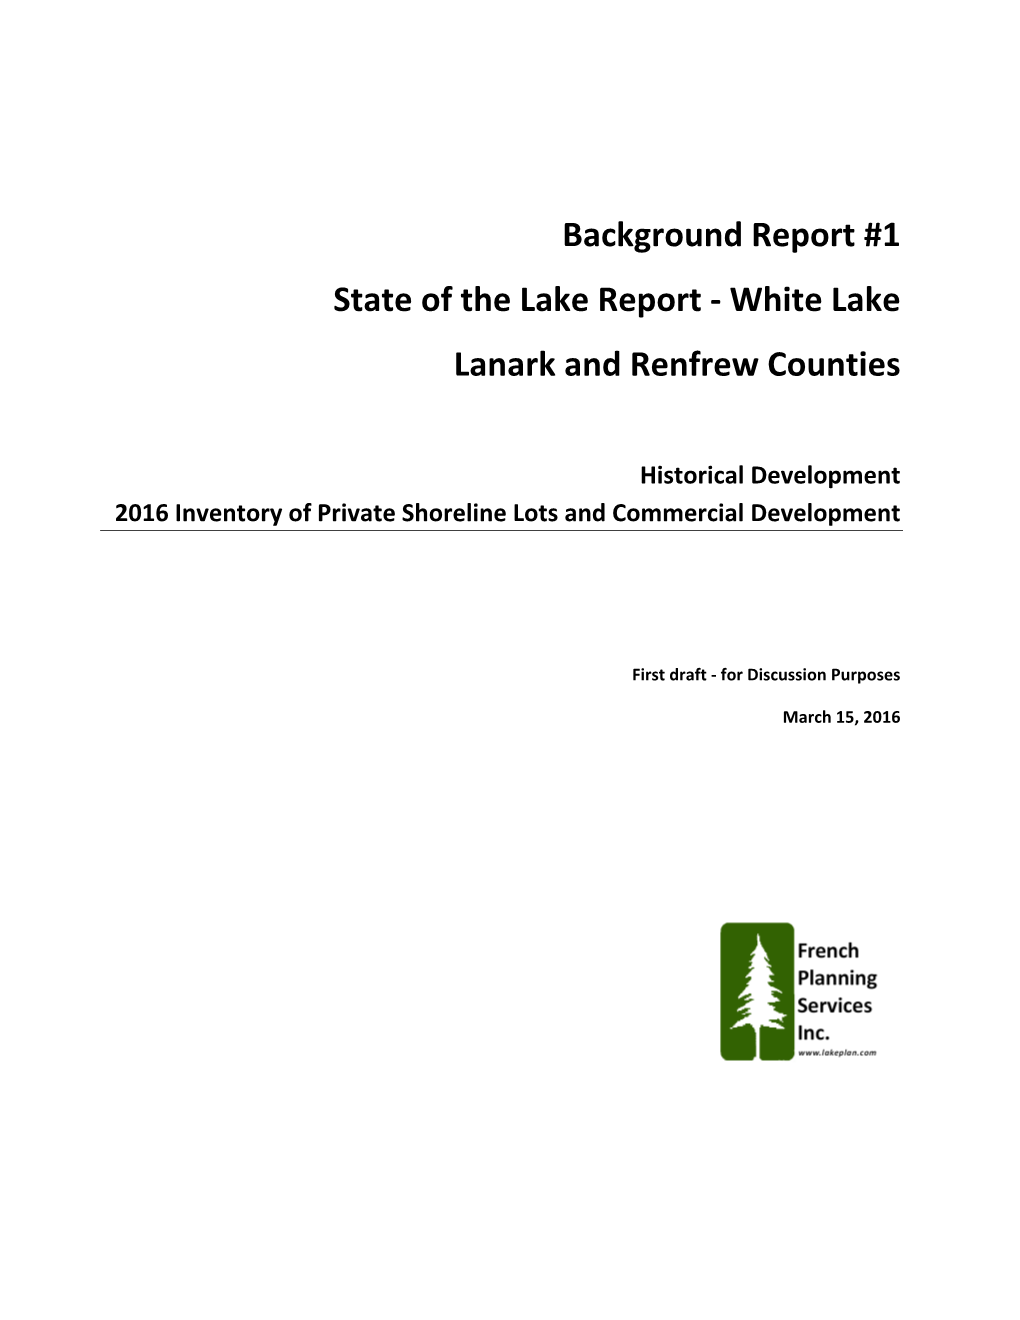 Background Report #1 State of the Lake Report ‐ White Lake Lanark and Renfrew Counties